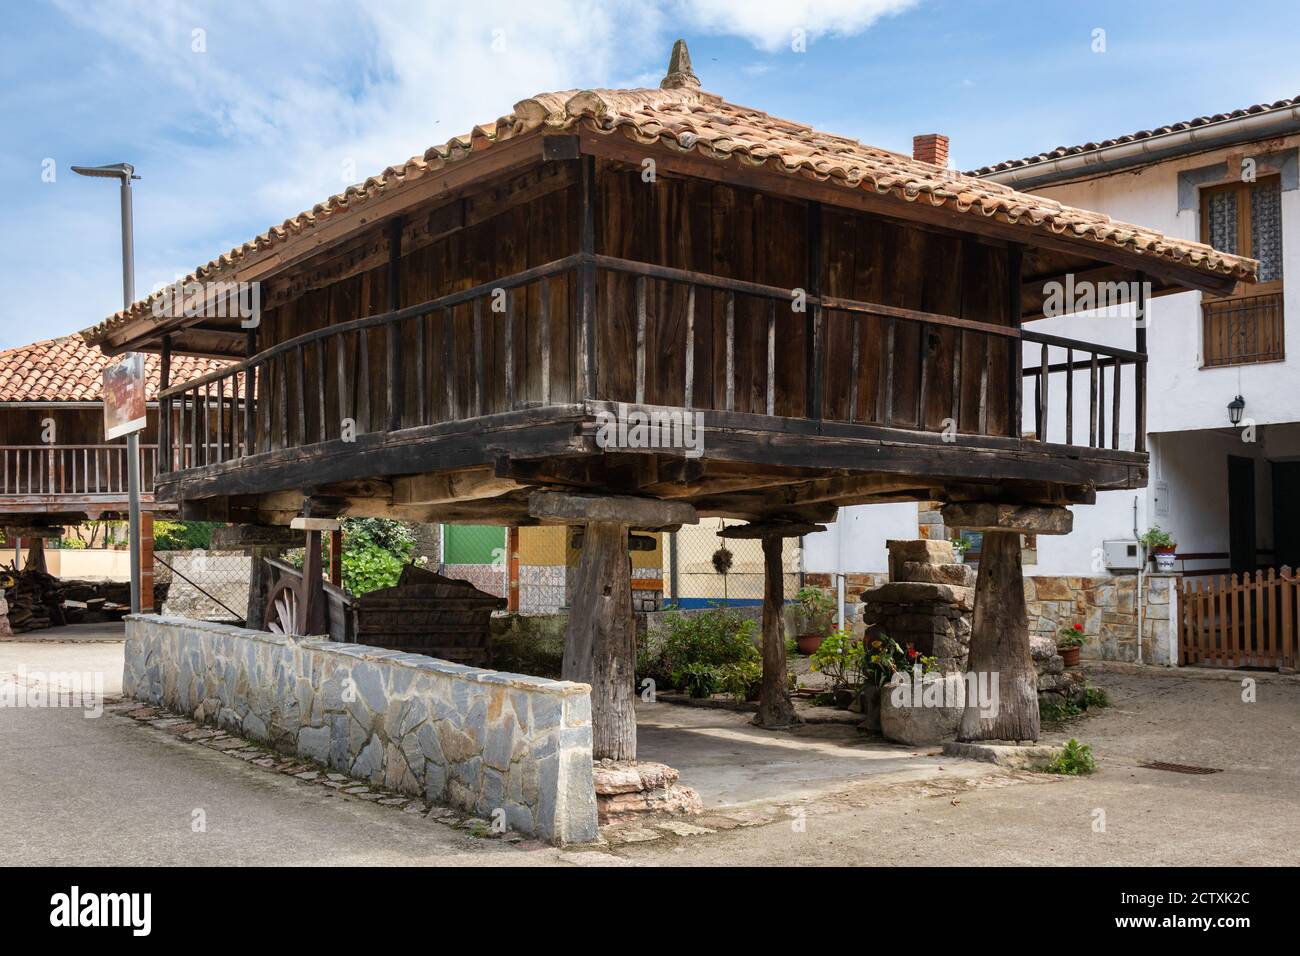 Spain; Sep 20: Hórreo, traditional granary from the North of Spain, built in wood and stone on four pillars that raise the horreo from the floor. Its Stock Photo